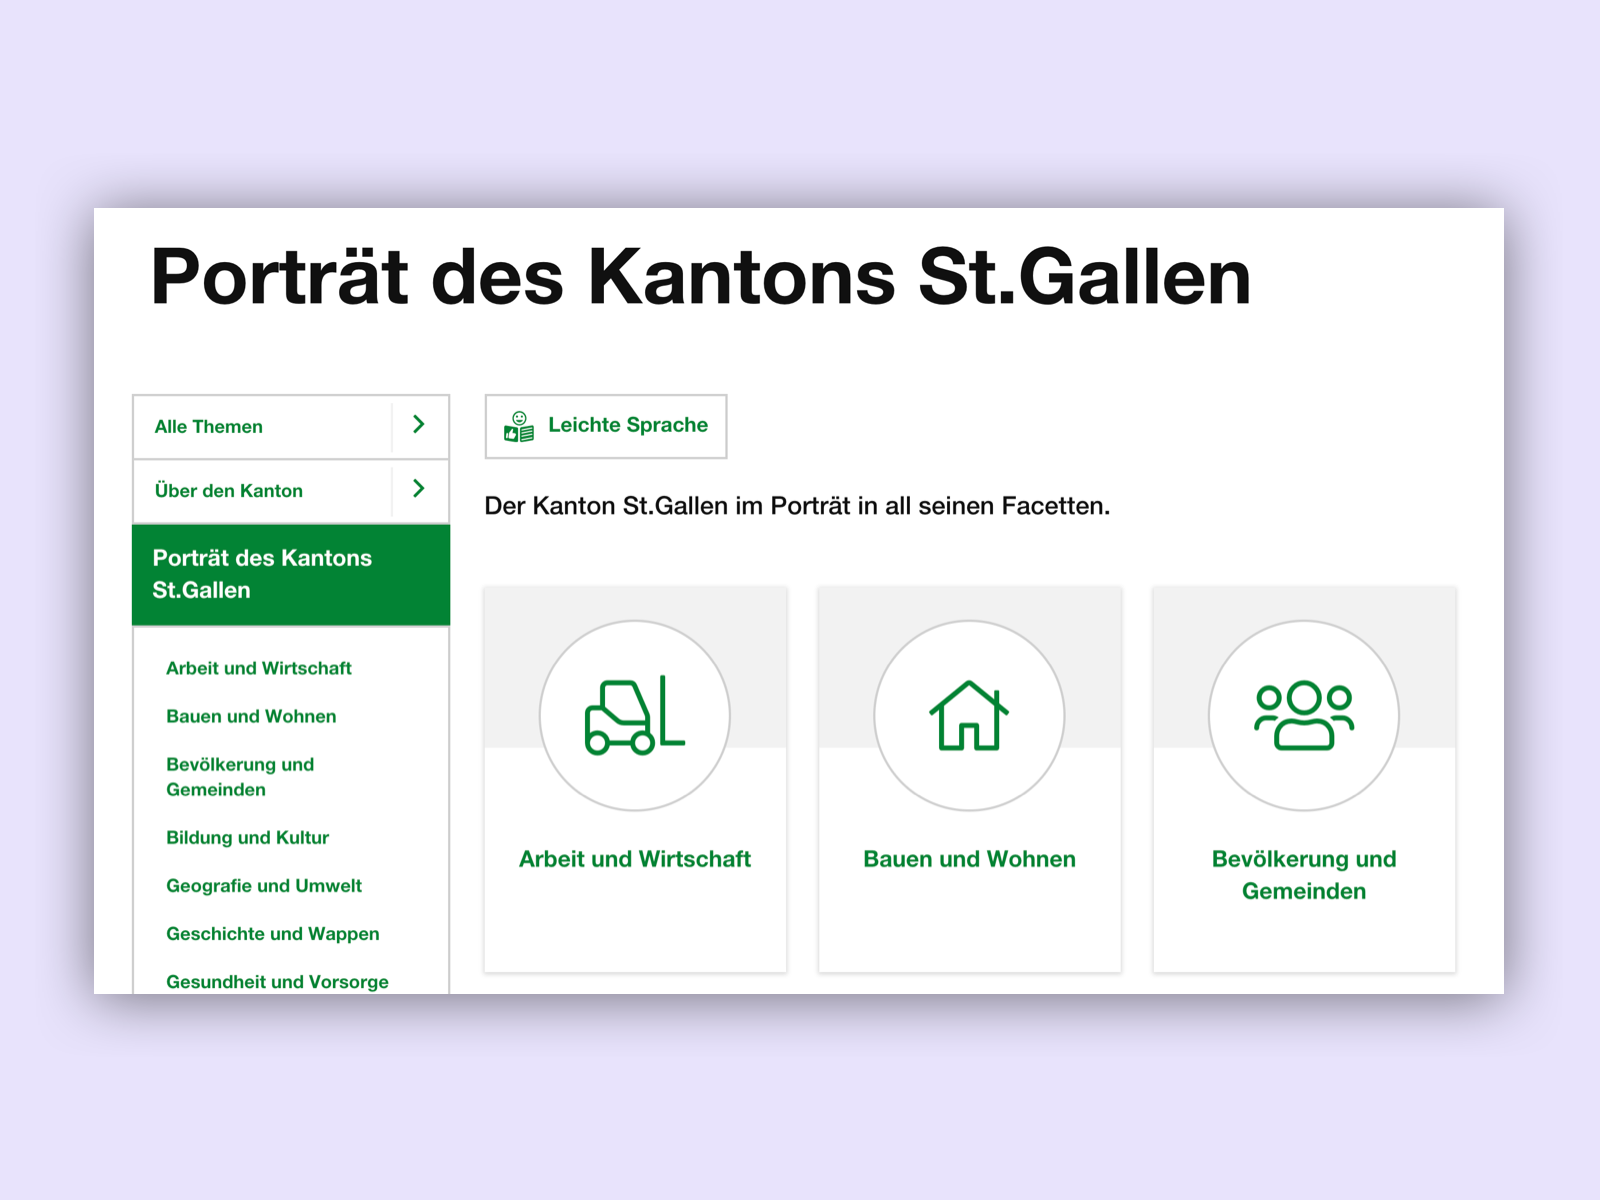 In this picture we see the website of the canton st.gallen, which offers a simple language option